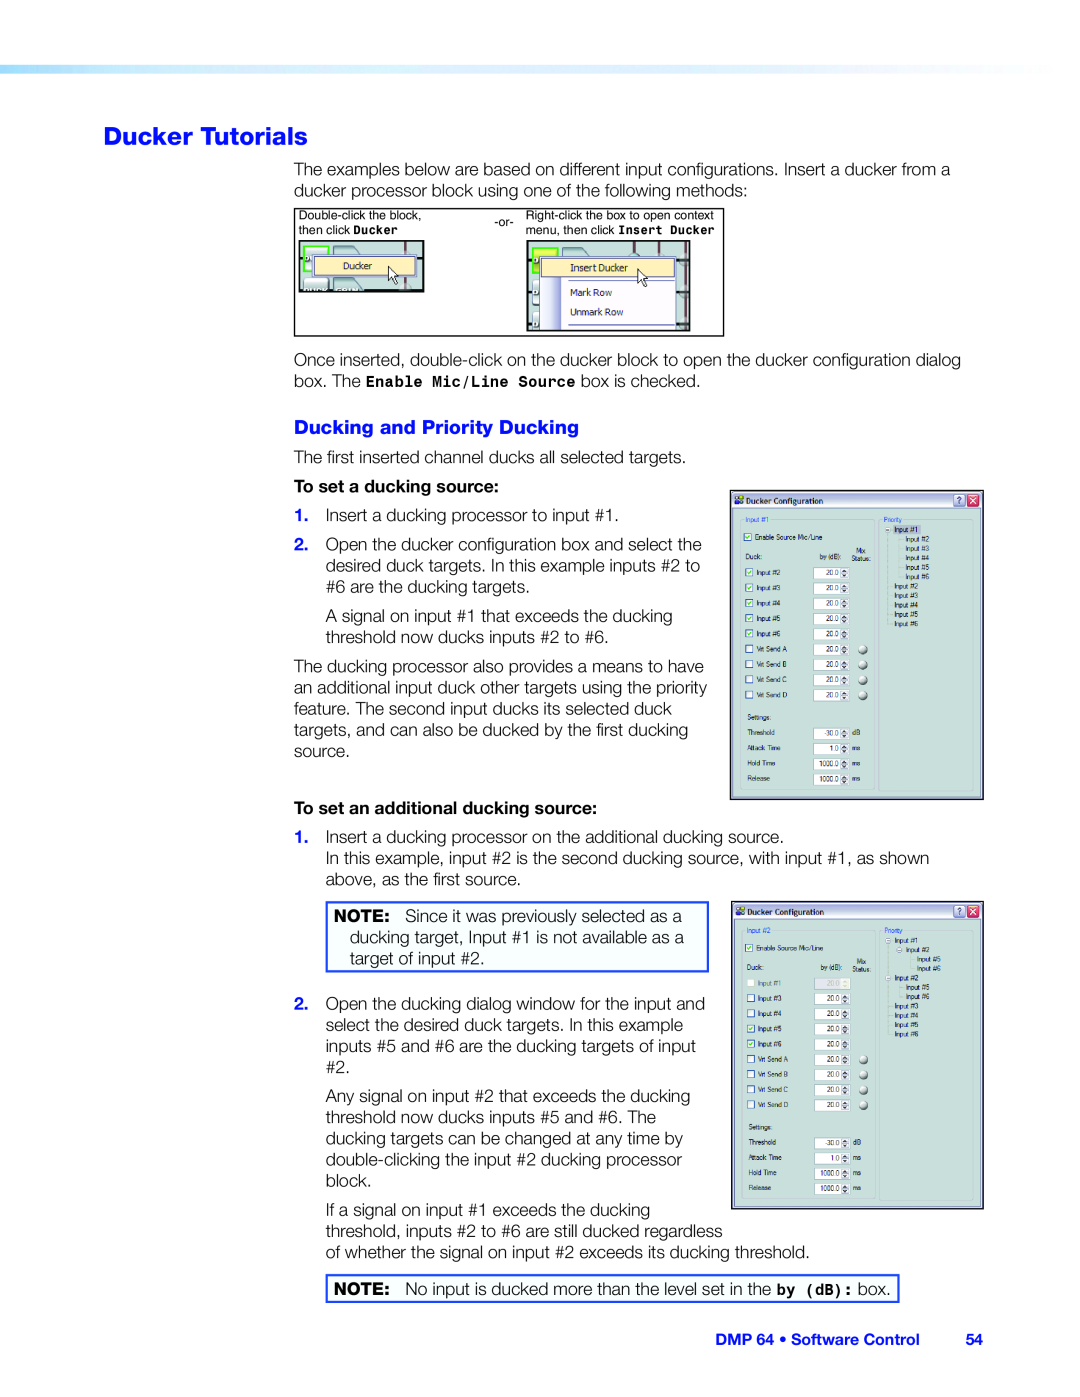 Extron electronic DMP 64 manual Ducker Tutorials, Ducking and Priority Ducking, To set a ducking source 